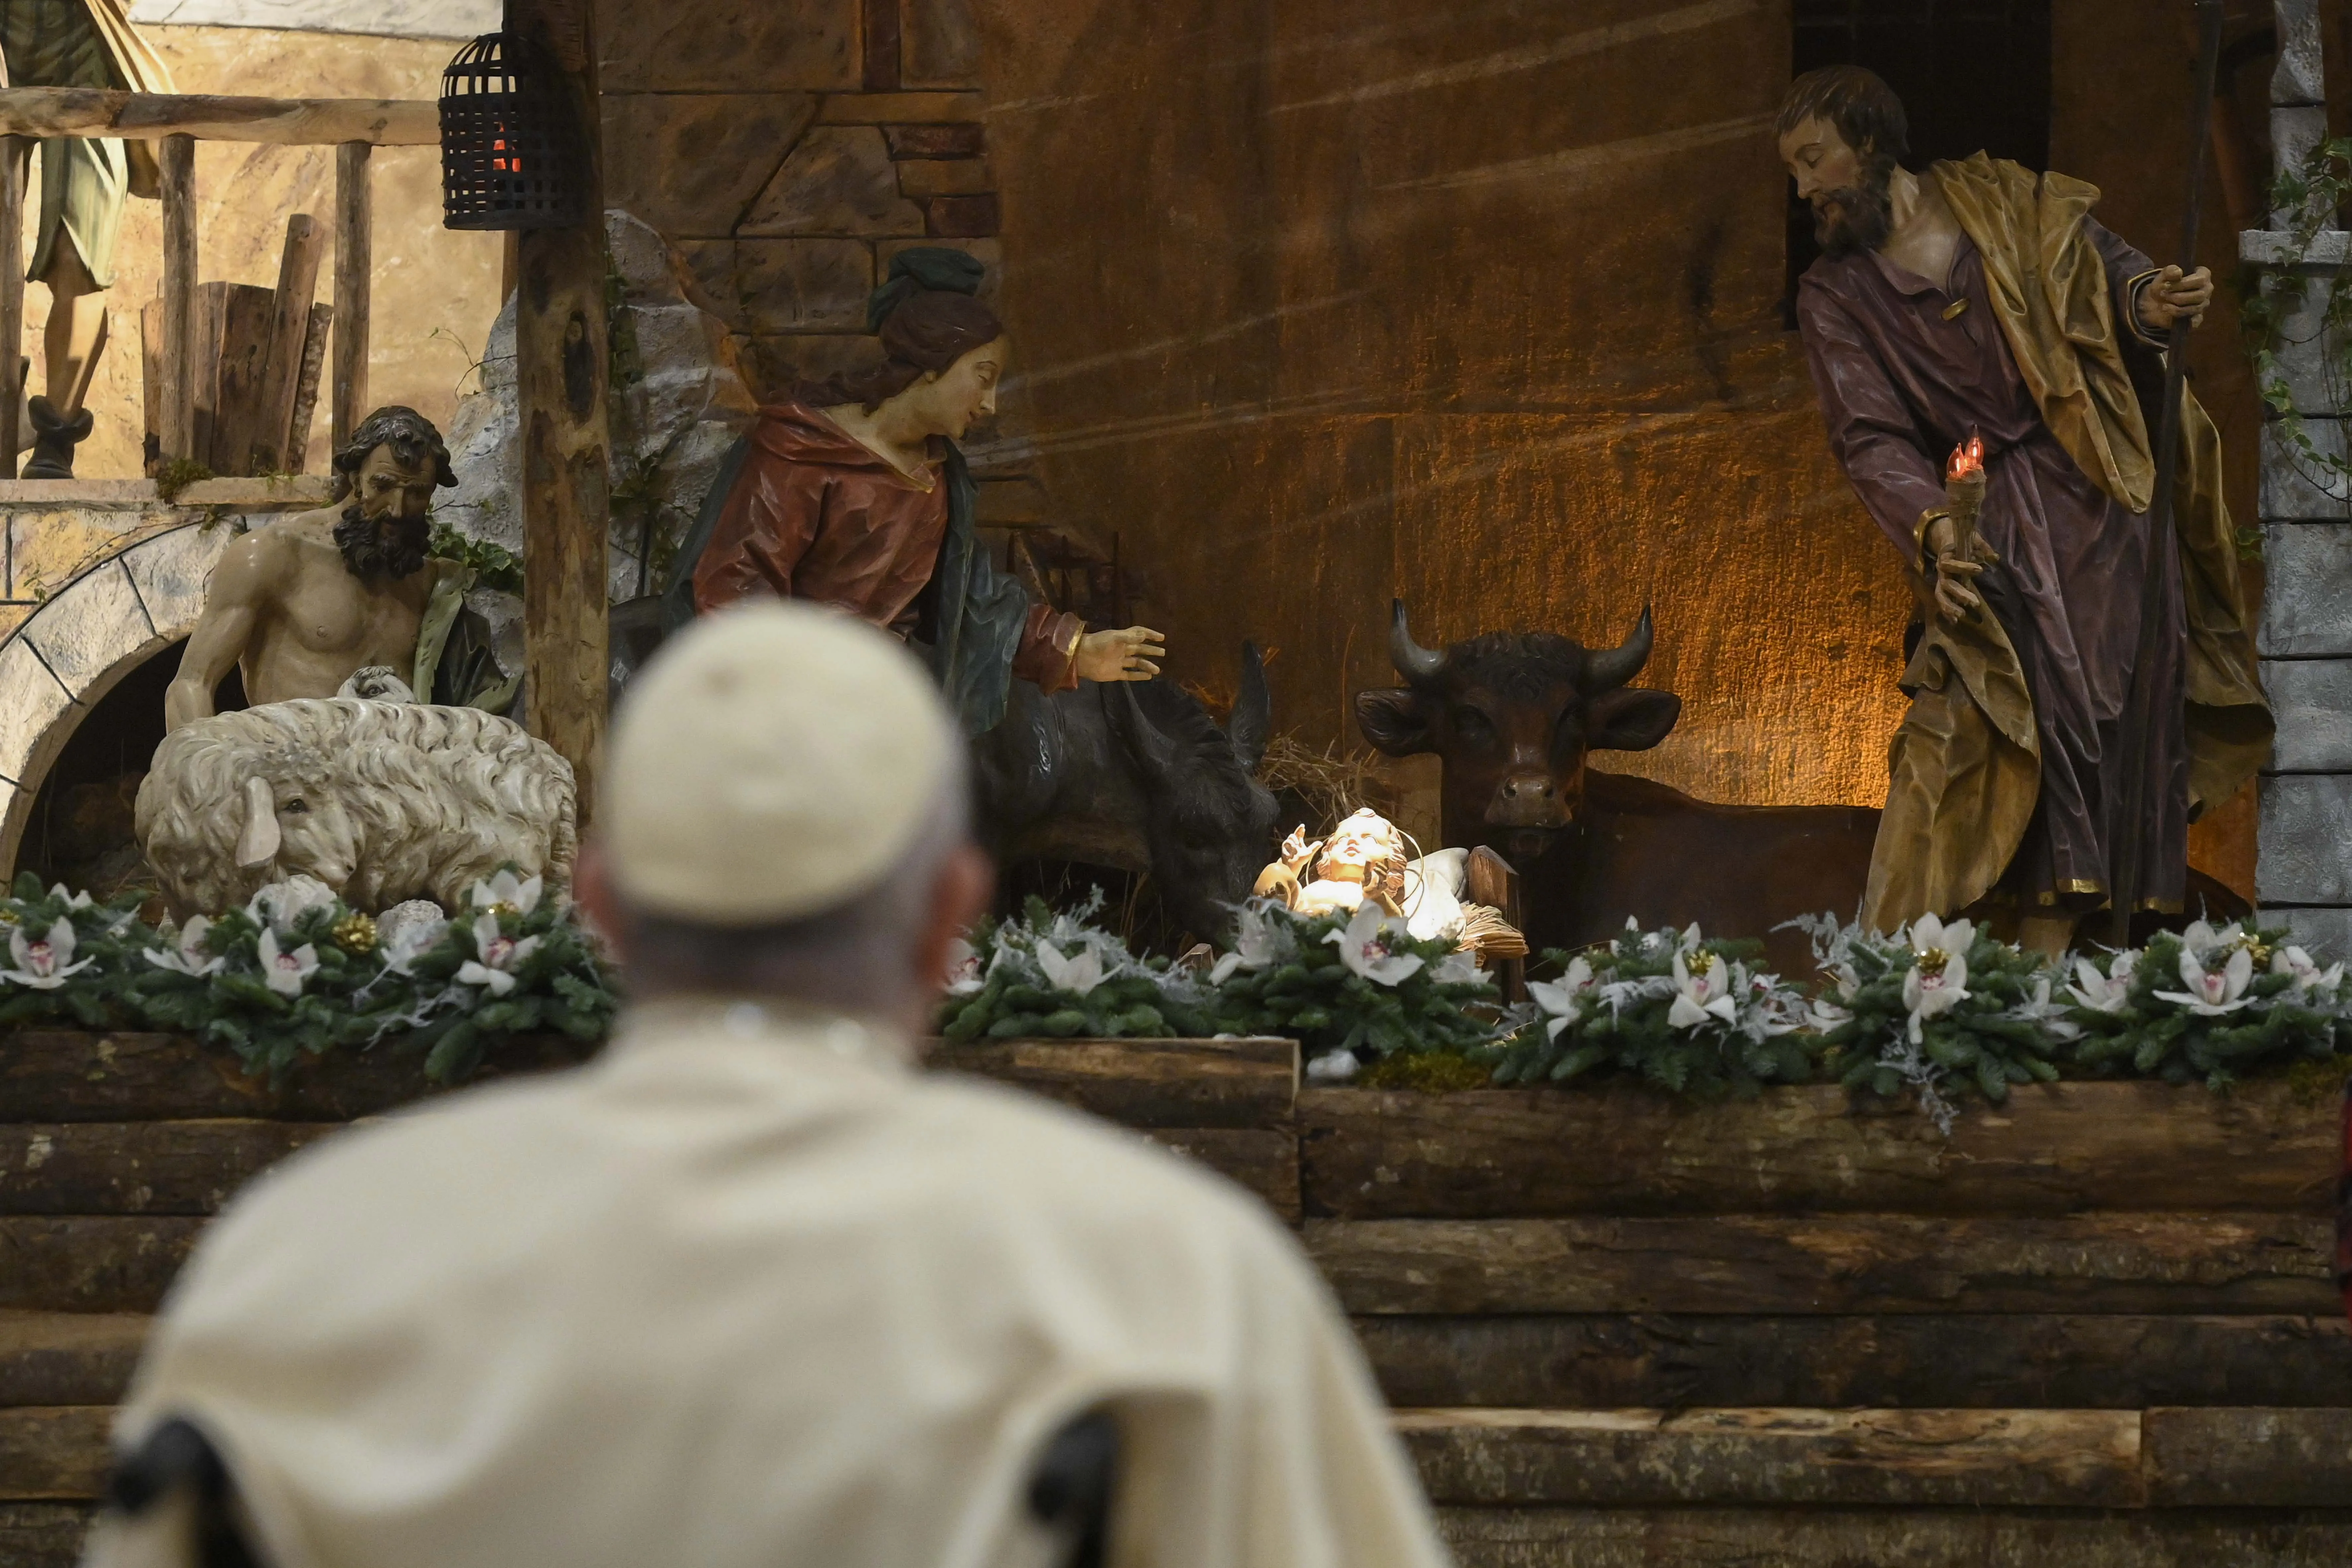 Pope Francis prays in front of the nativity scene after Christmas Mass Dec. 24, 2022.?w=200&h=150